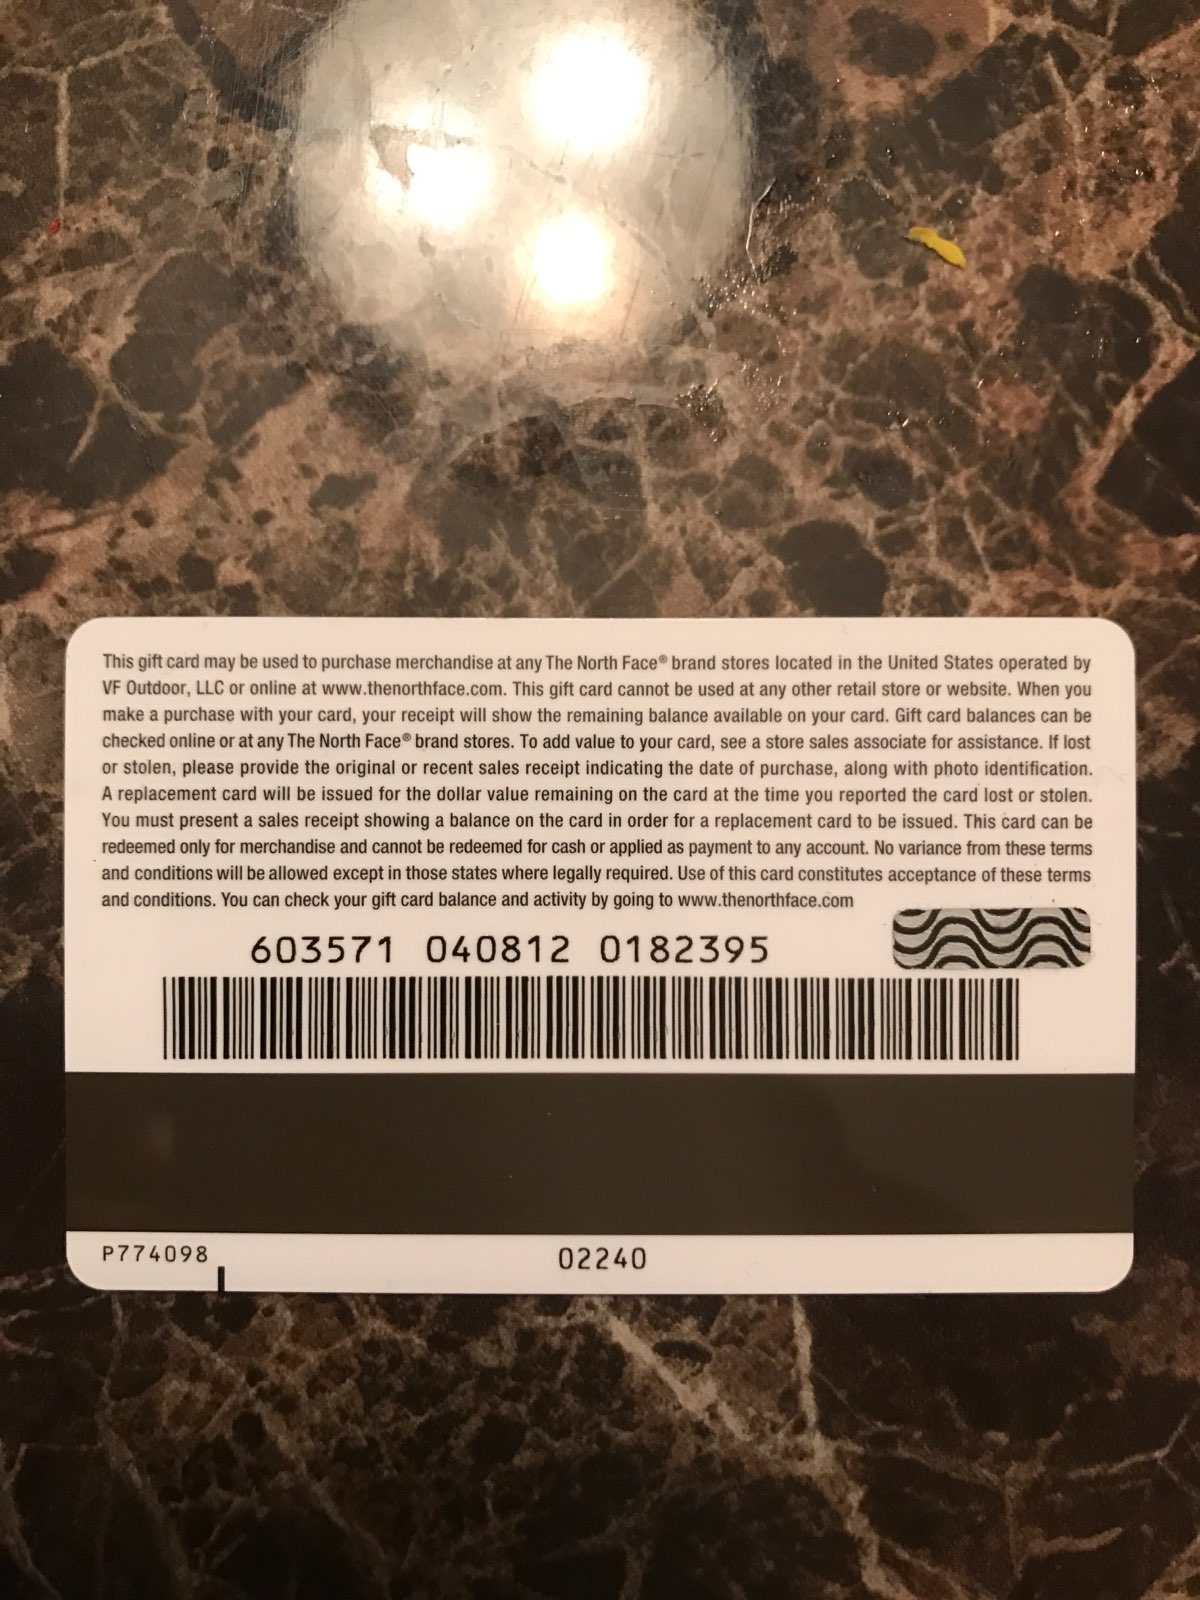 The back of the card where the rules are stated